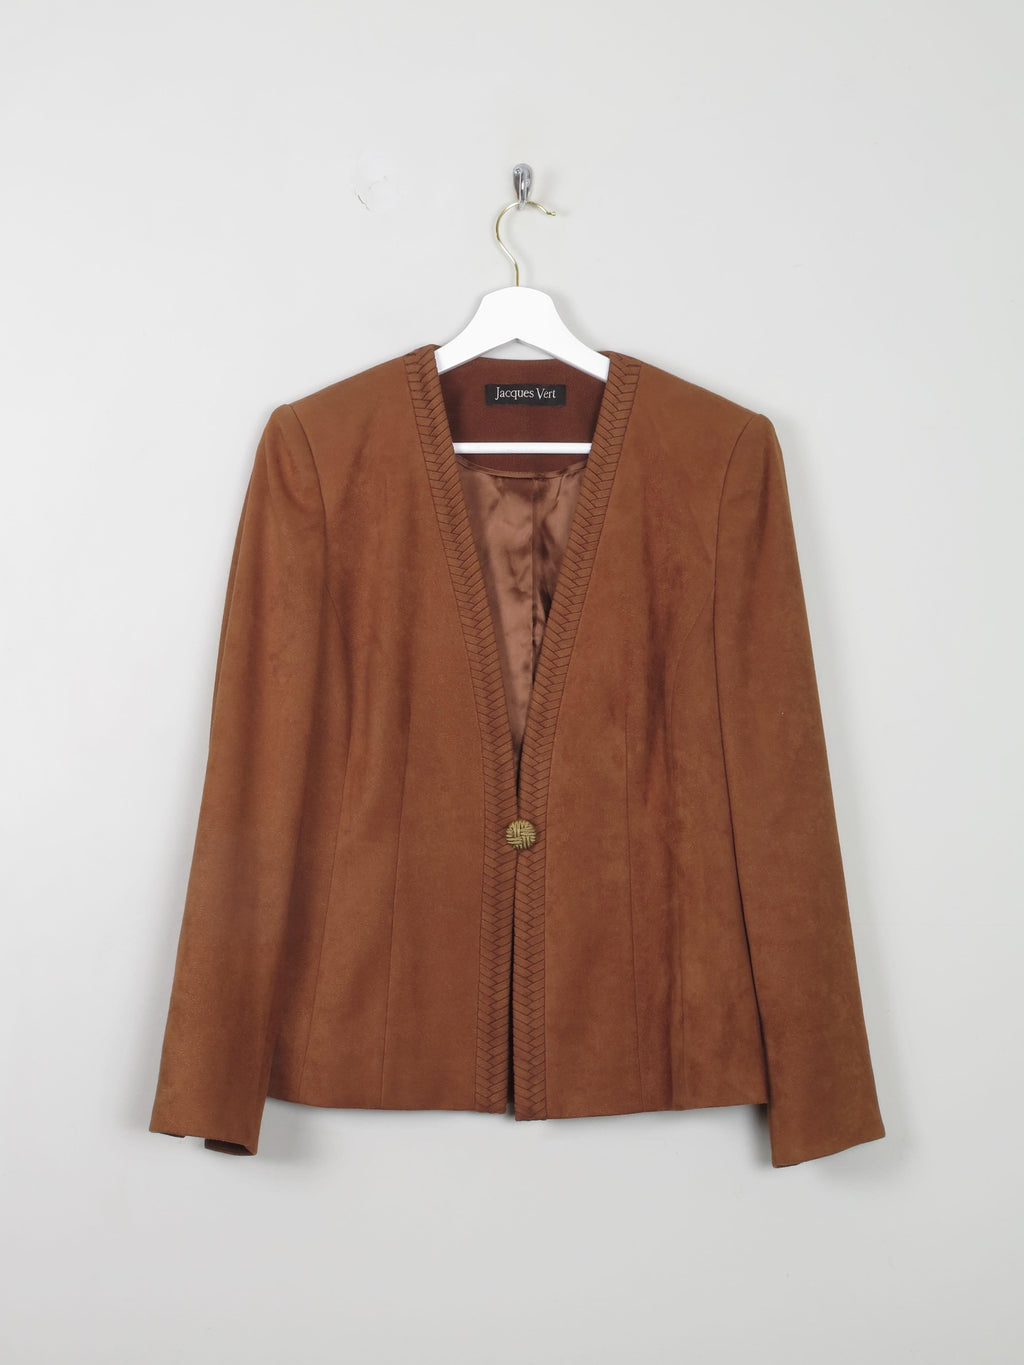 Women's Vintage Suede Style Fabric Rust/Tan Jacques Vert S - The Harlequin